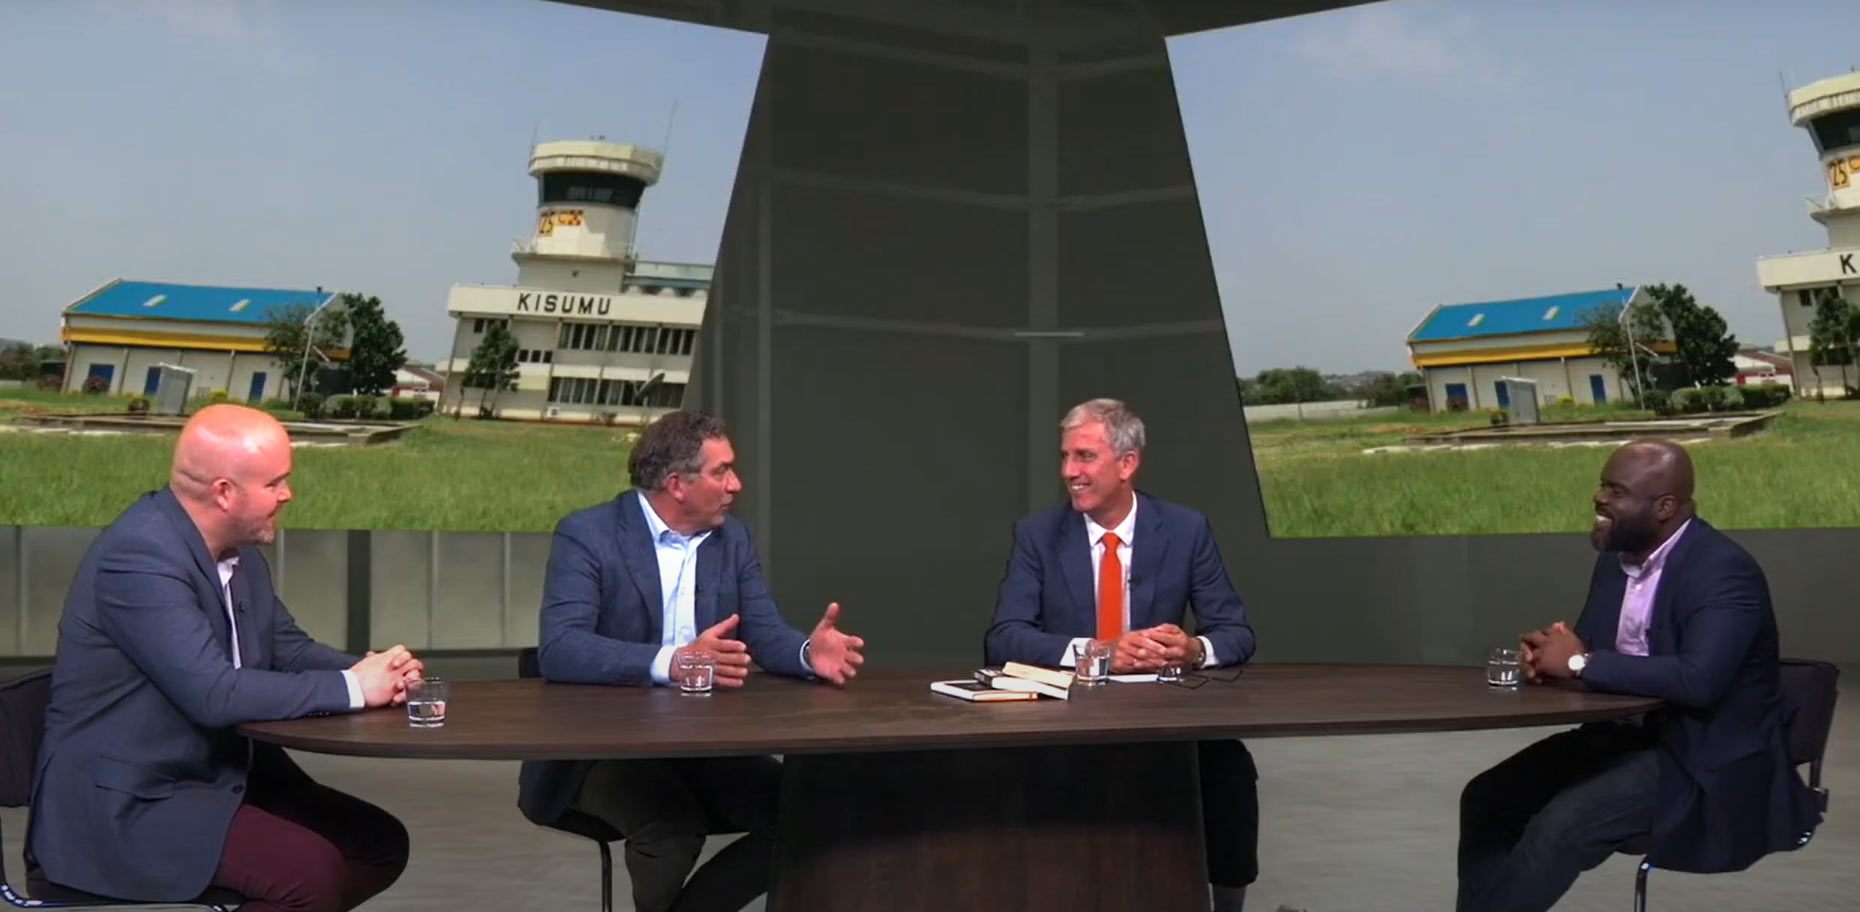 Watch the latest AviAssist Focus Session to learn about aircraft leasing and safety in Africa